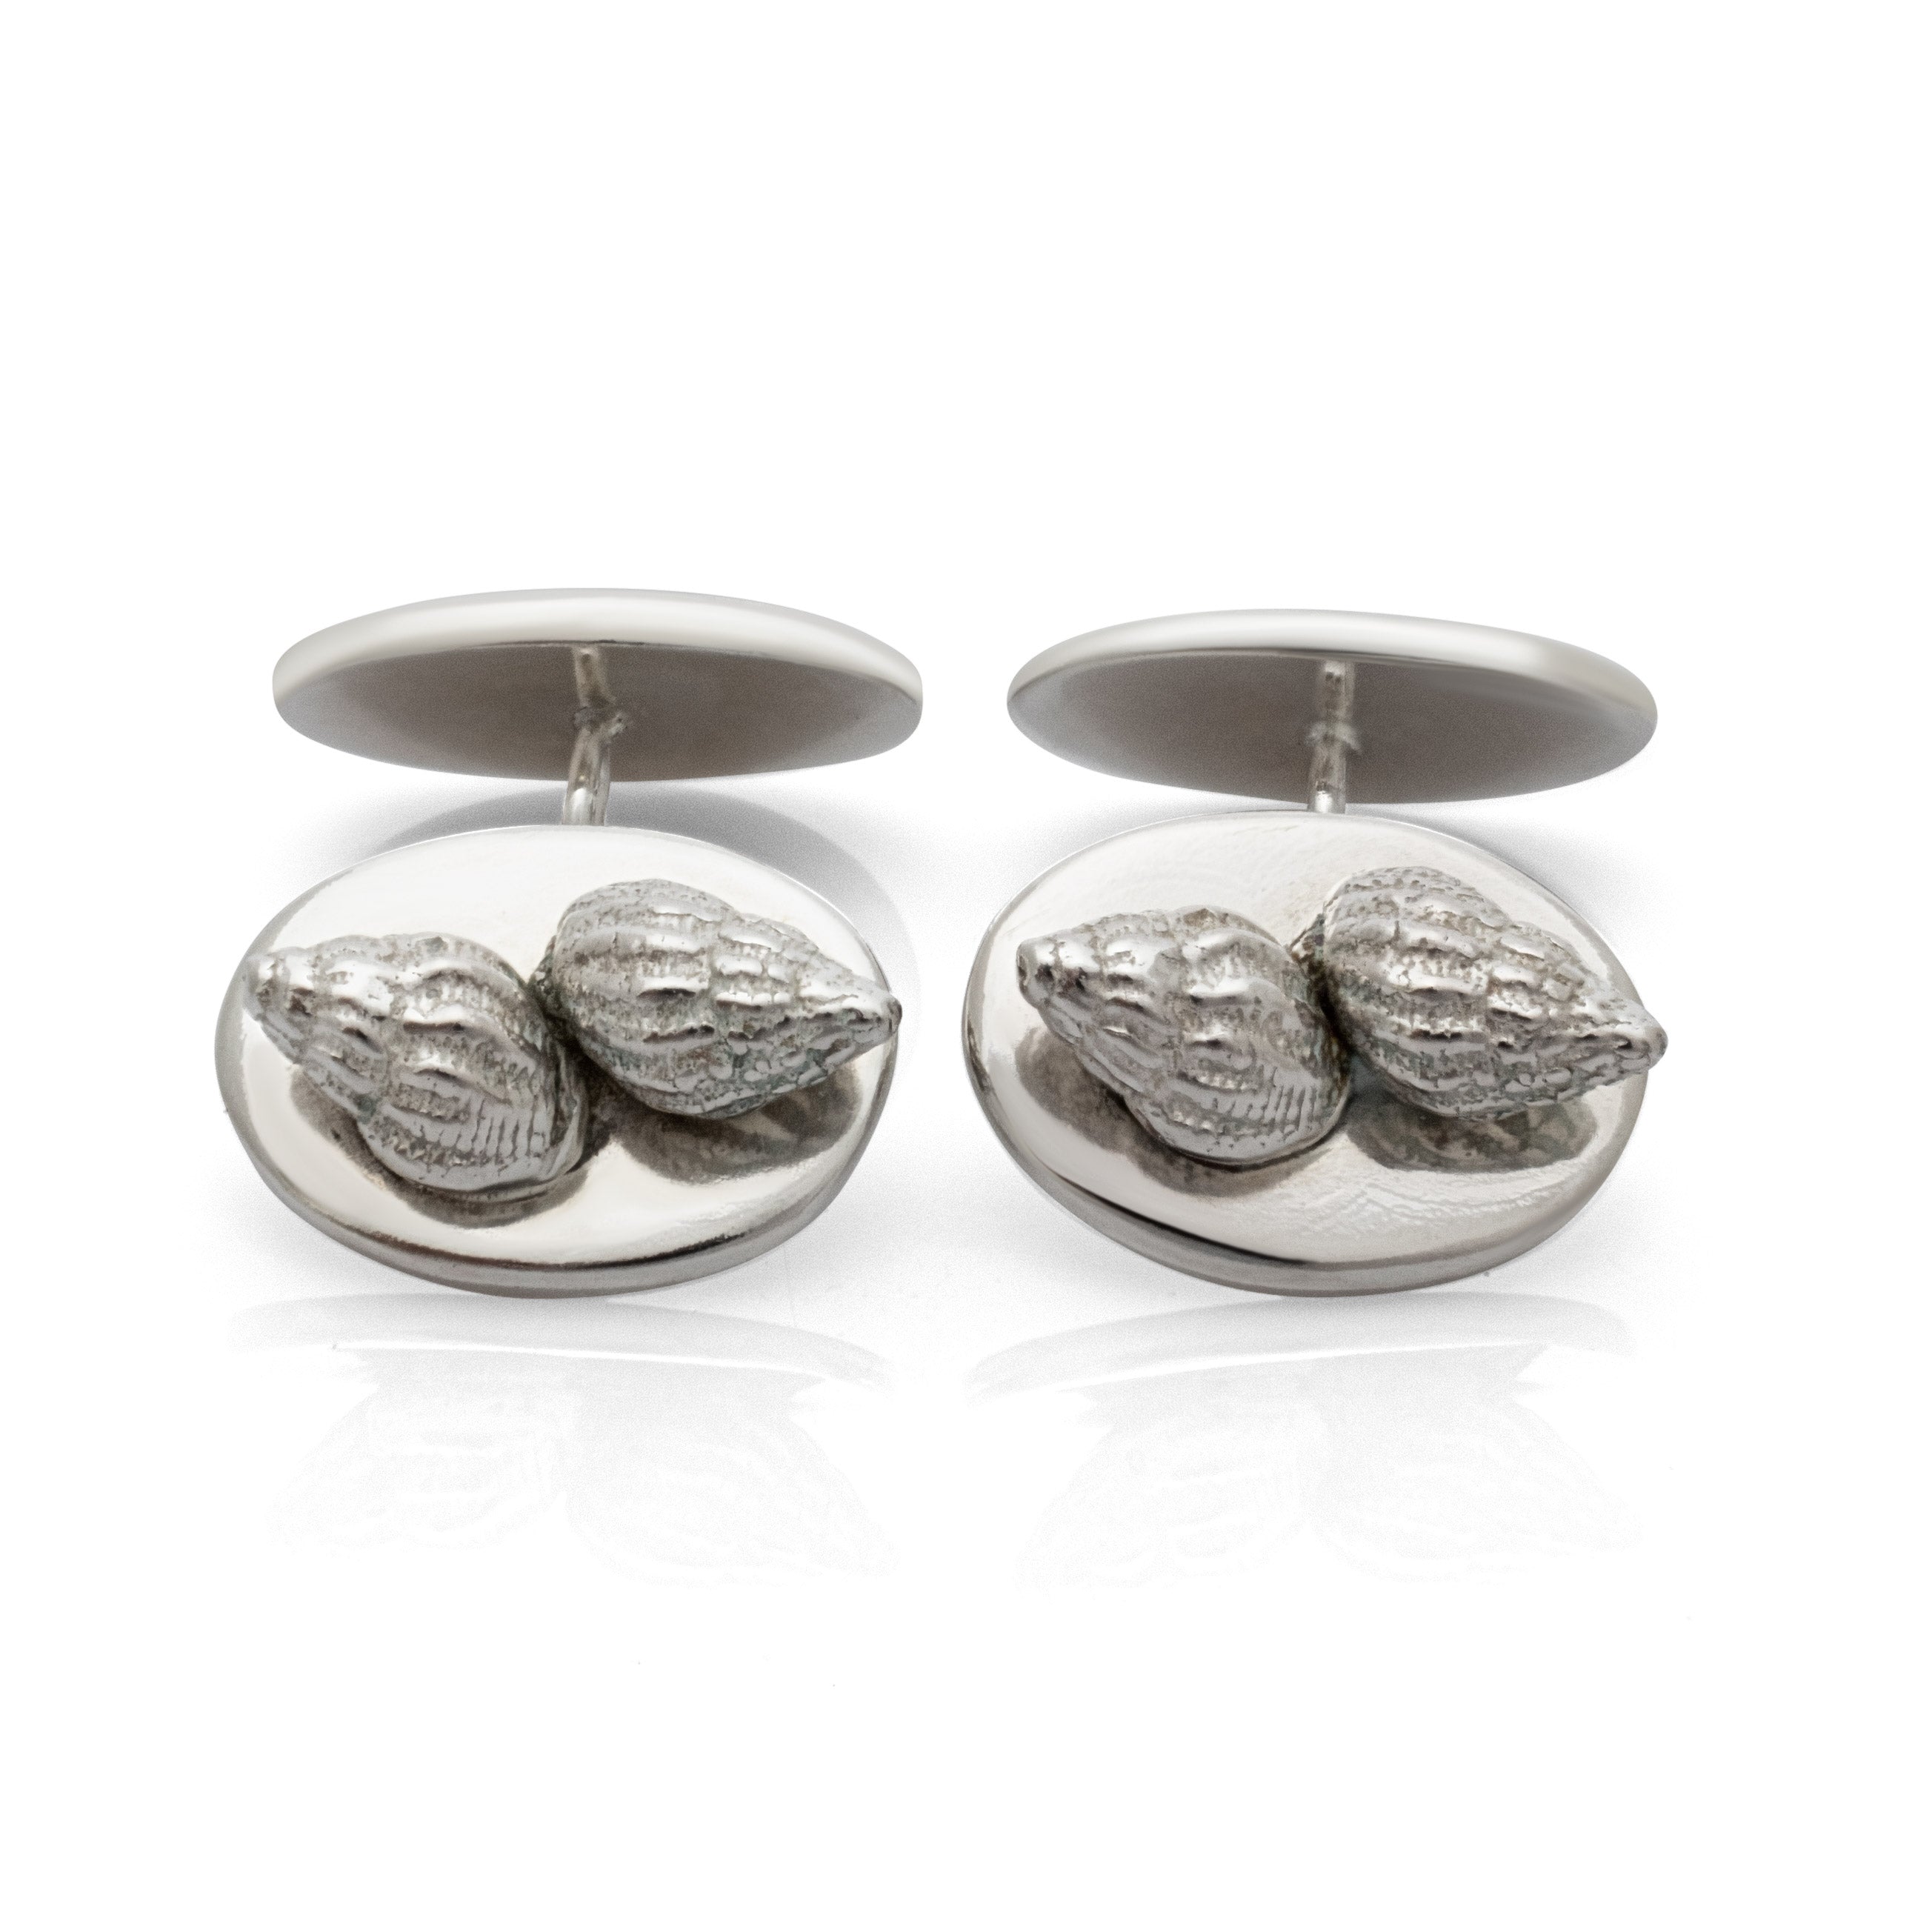 Langland Bay cufflinks. Langland Bay cufflinks. Langland Bay, Gower. Langland, Wales. Mumbles, Swansea. Gower jewellery. Gower cufflinks. Gower shell jewellery. Silver shell jewellery. Those Happy Places. Serena Ansell Jewellery.